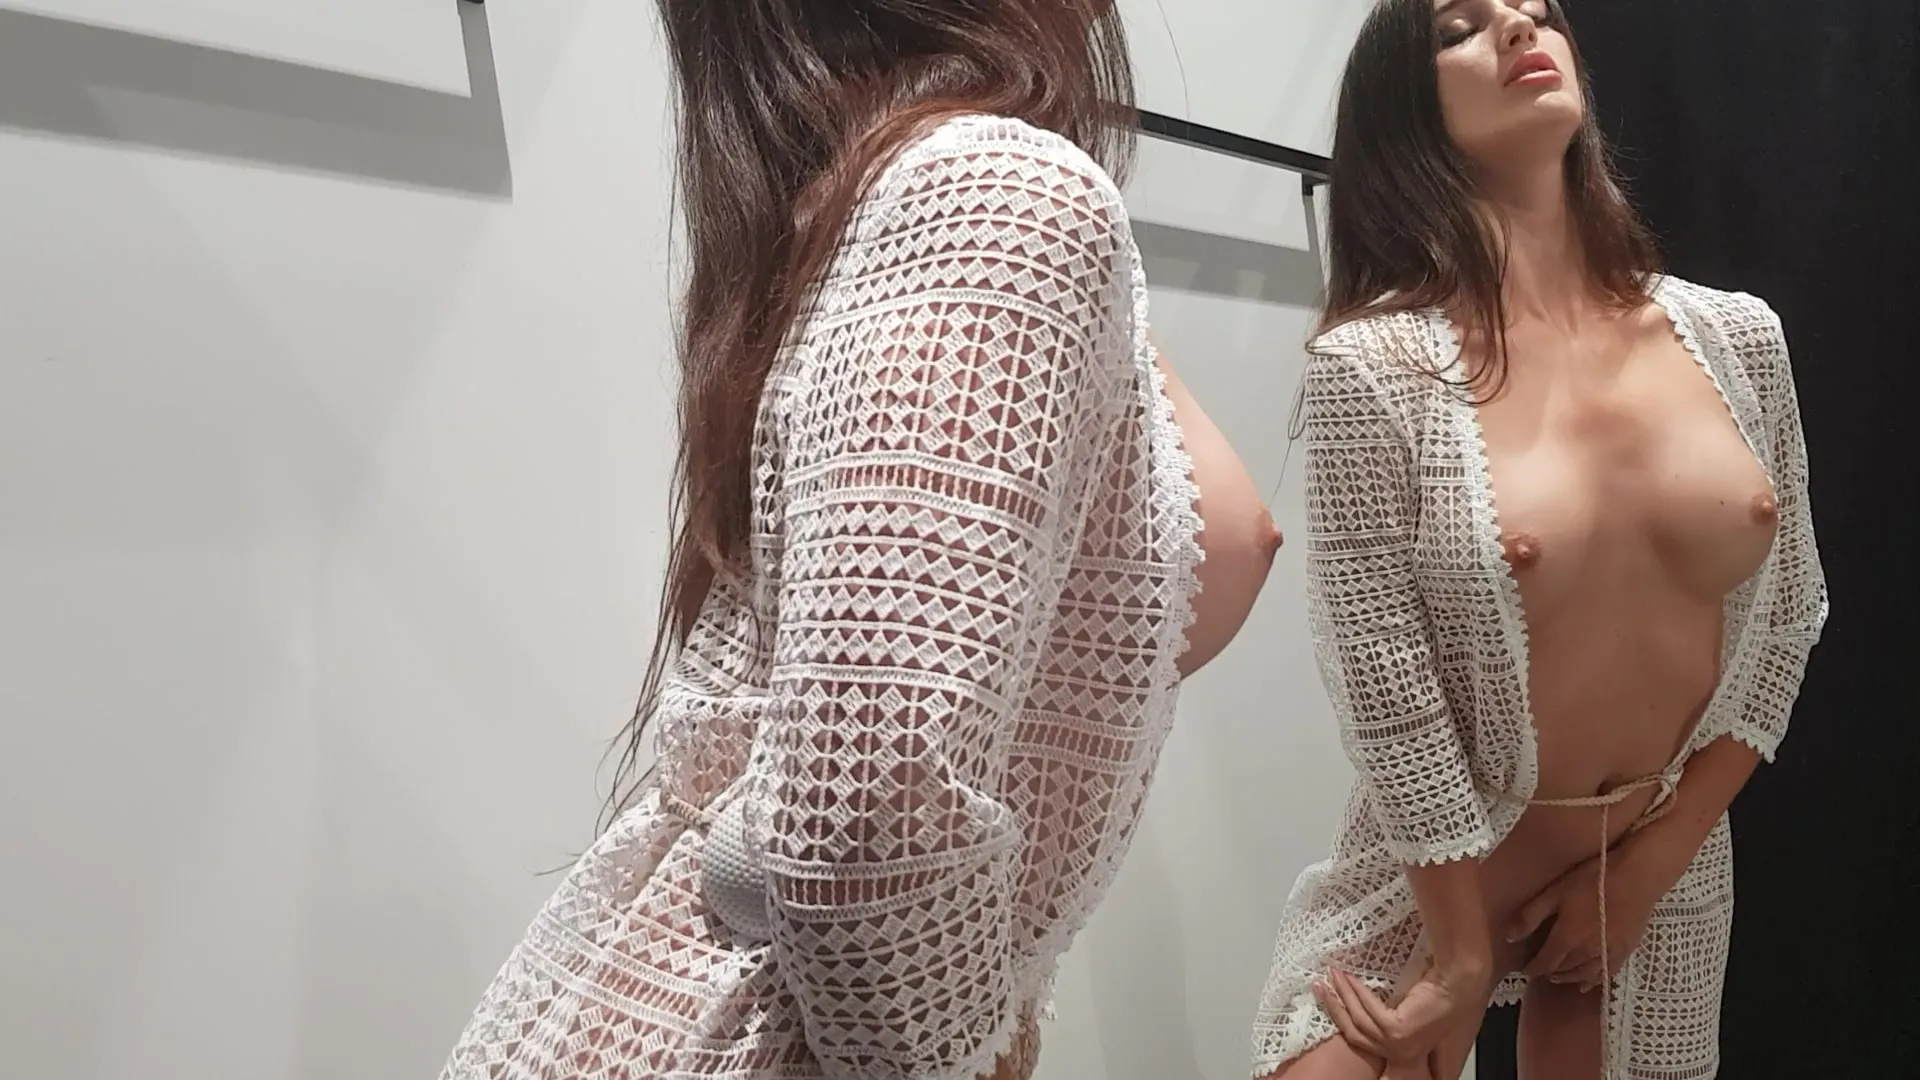 Gorgeous Busty Brunette Masturbates in Fitting Room photo